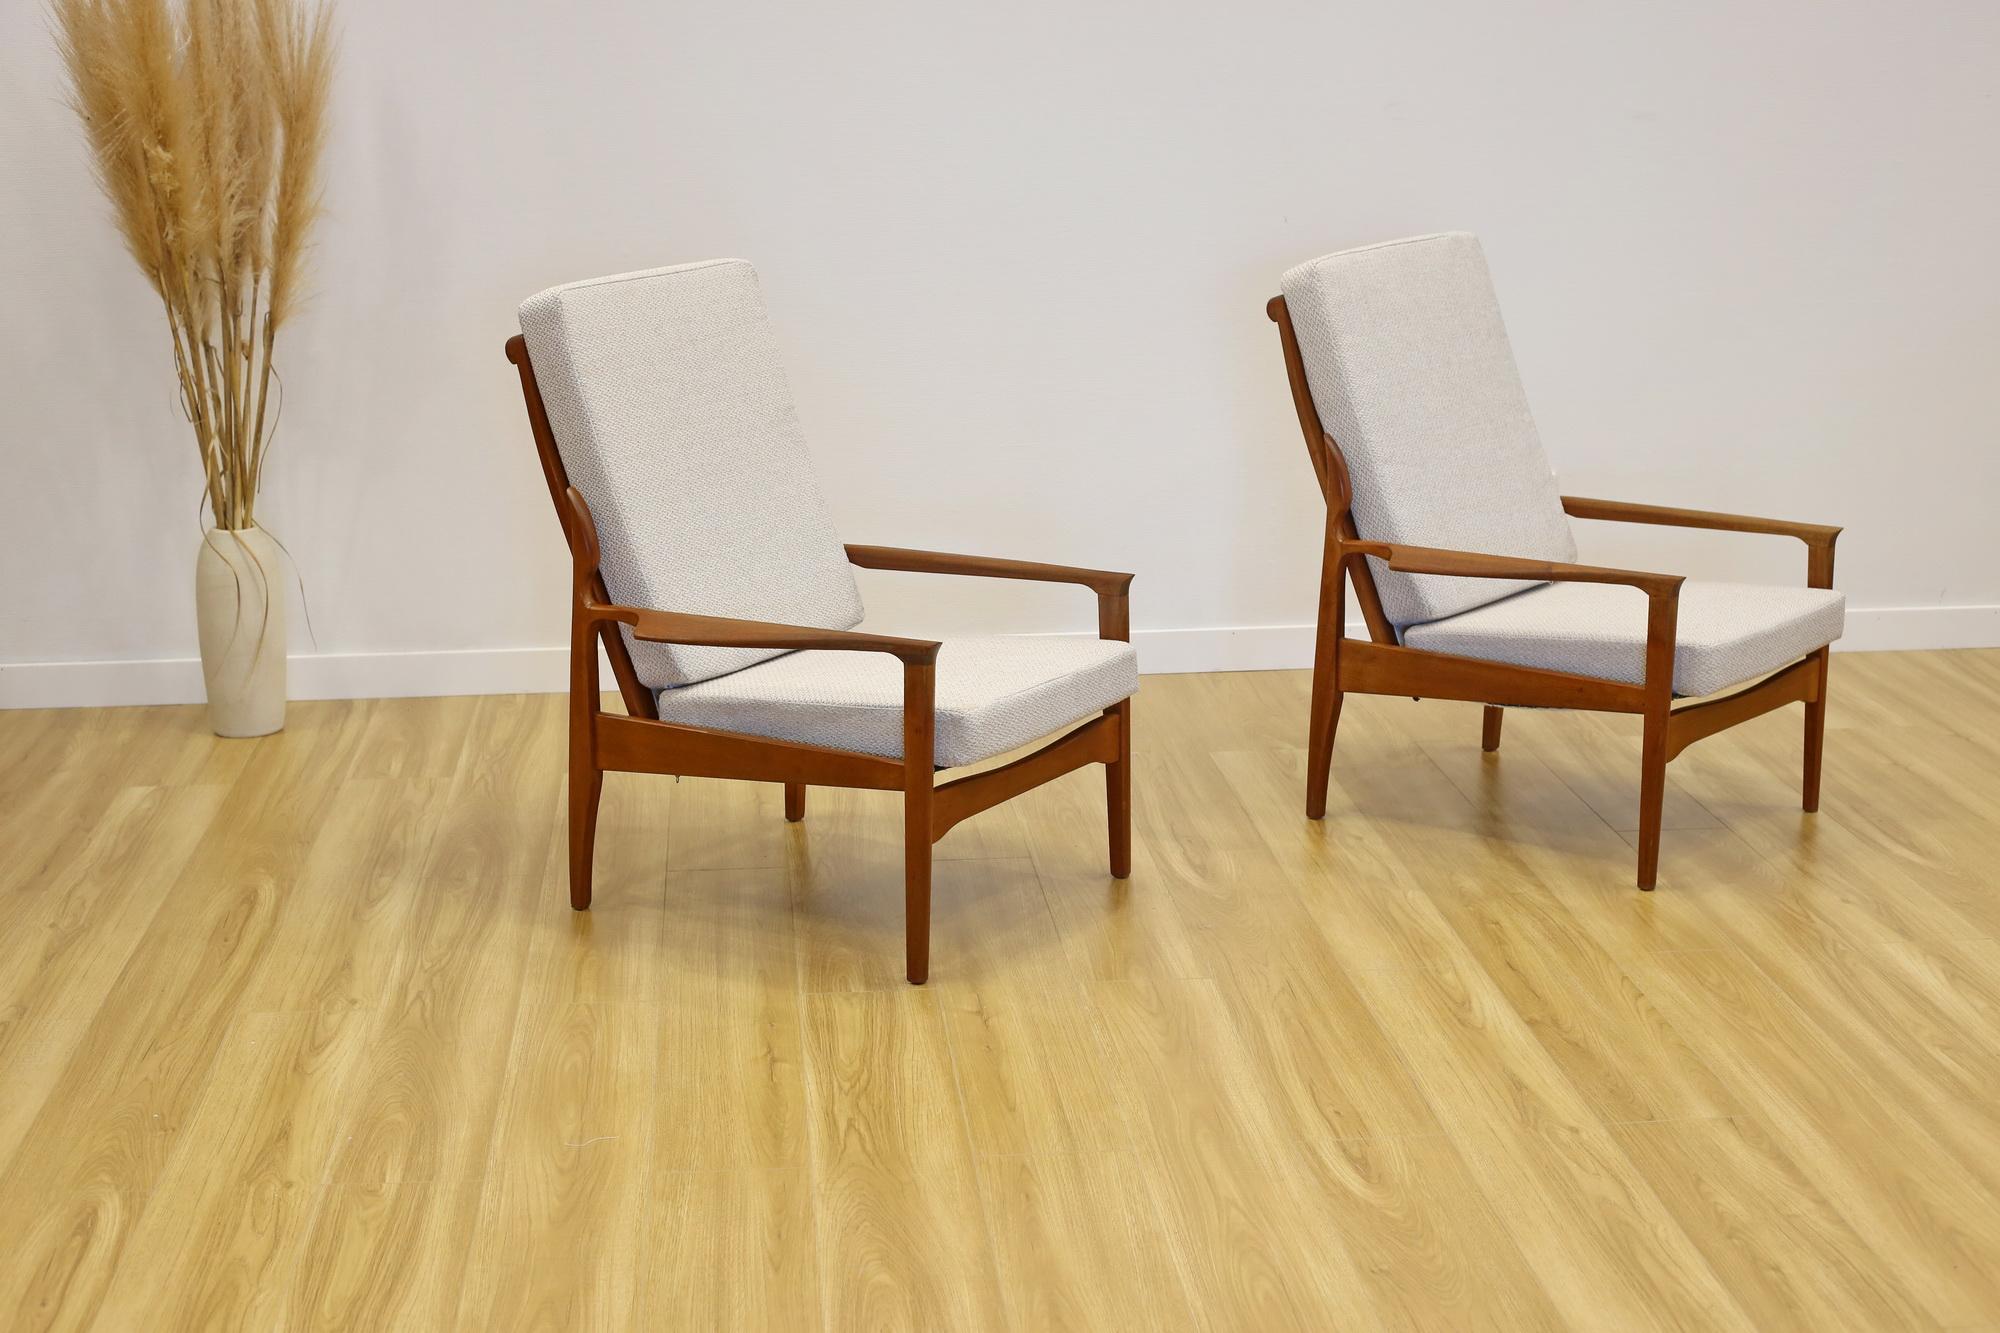 A Pair Don Narvic armchairs in good condtion.

Newly wrapped high density foam and new zippable fabric cover.

Strong frames, no wobbly, beautiful wood grains.

Small scratches/dents/imperfection due to age. 

70W * 82D * 94H
seat high 42cm
seat